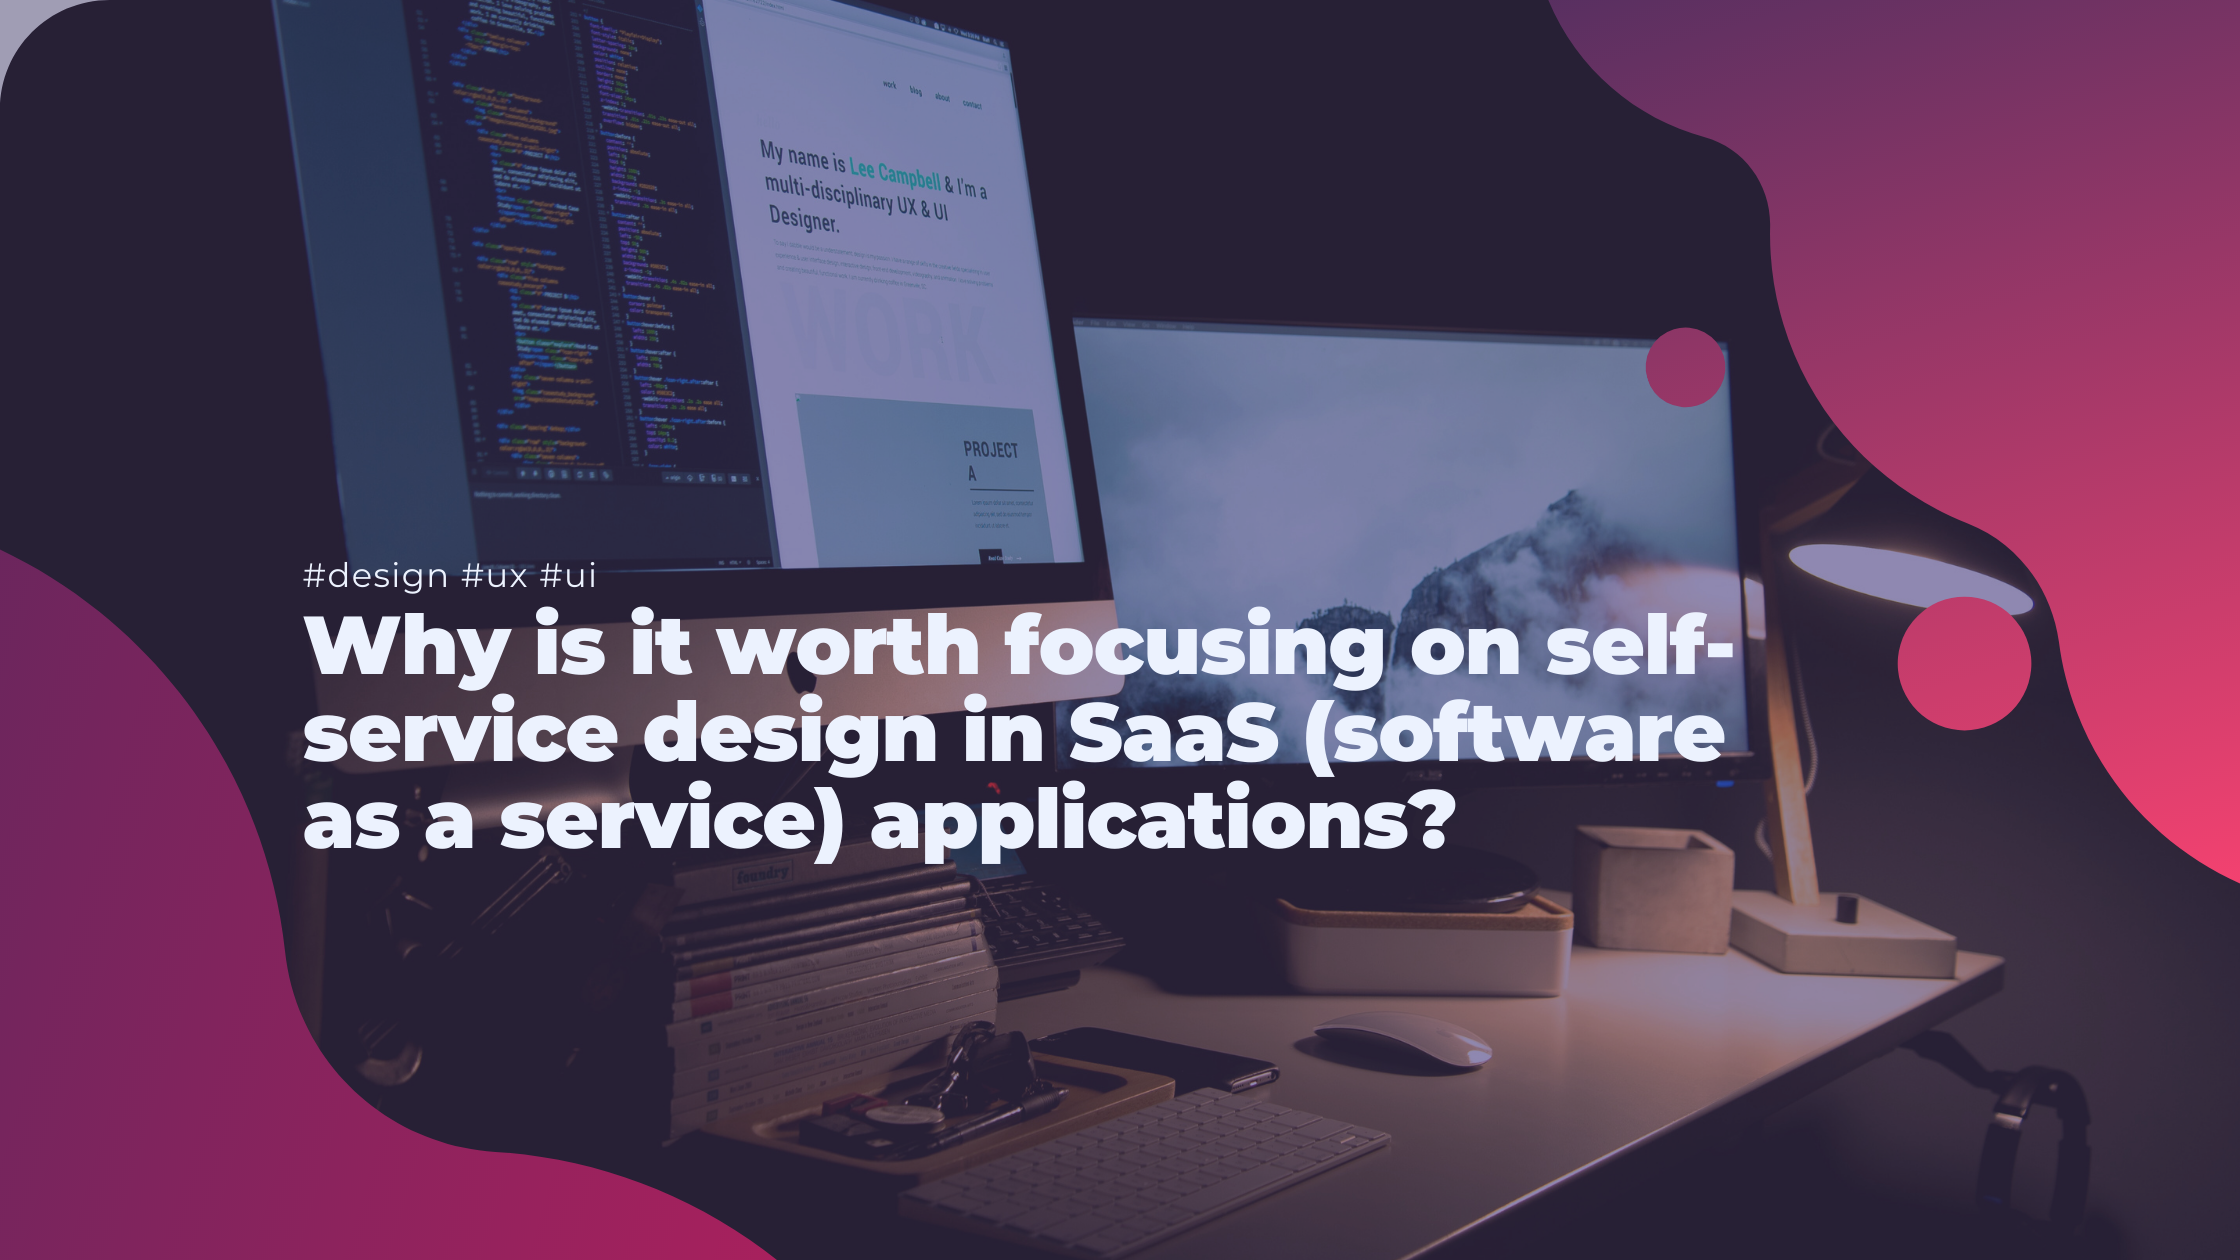 Software as a Service (SaaS) and Self-Service Design